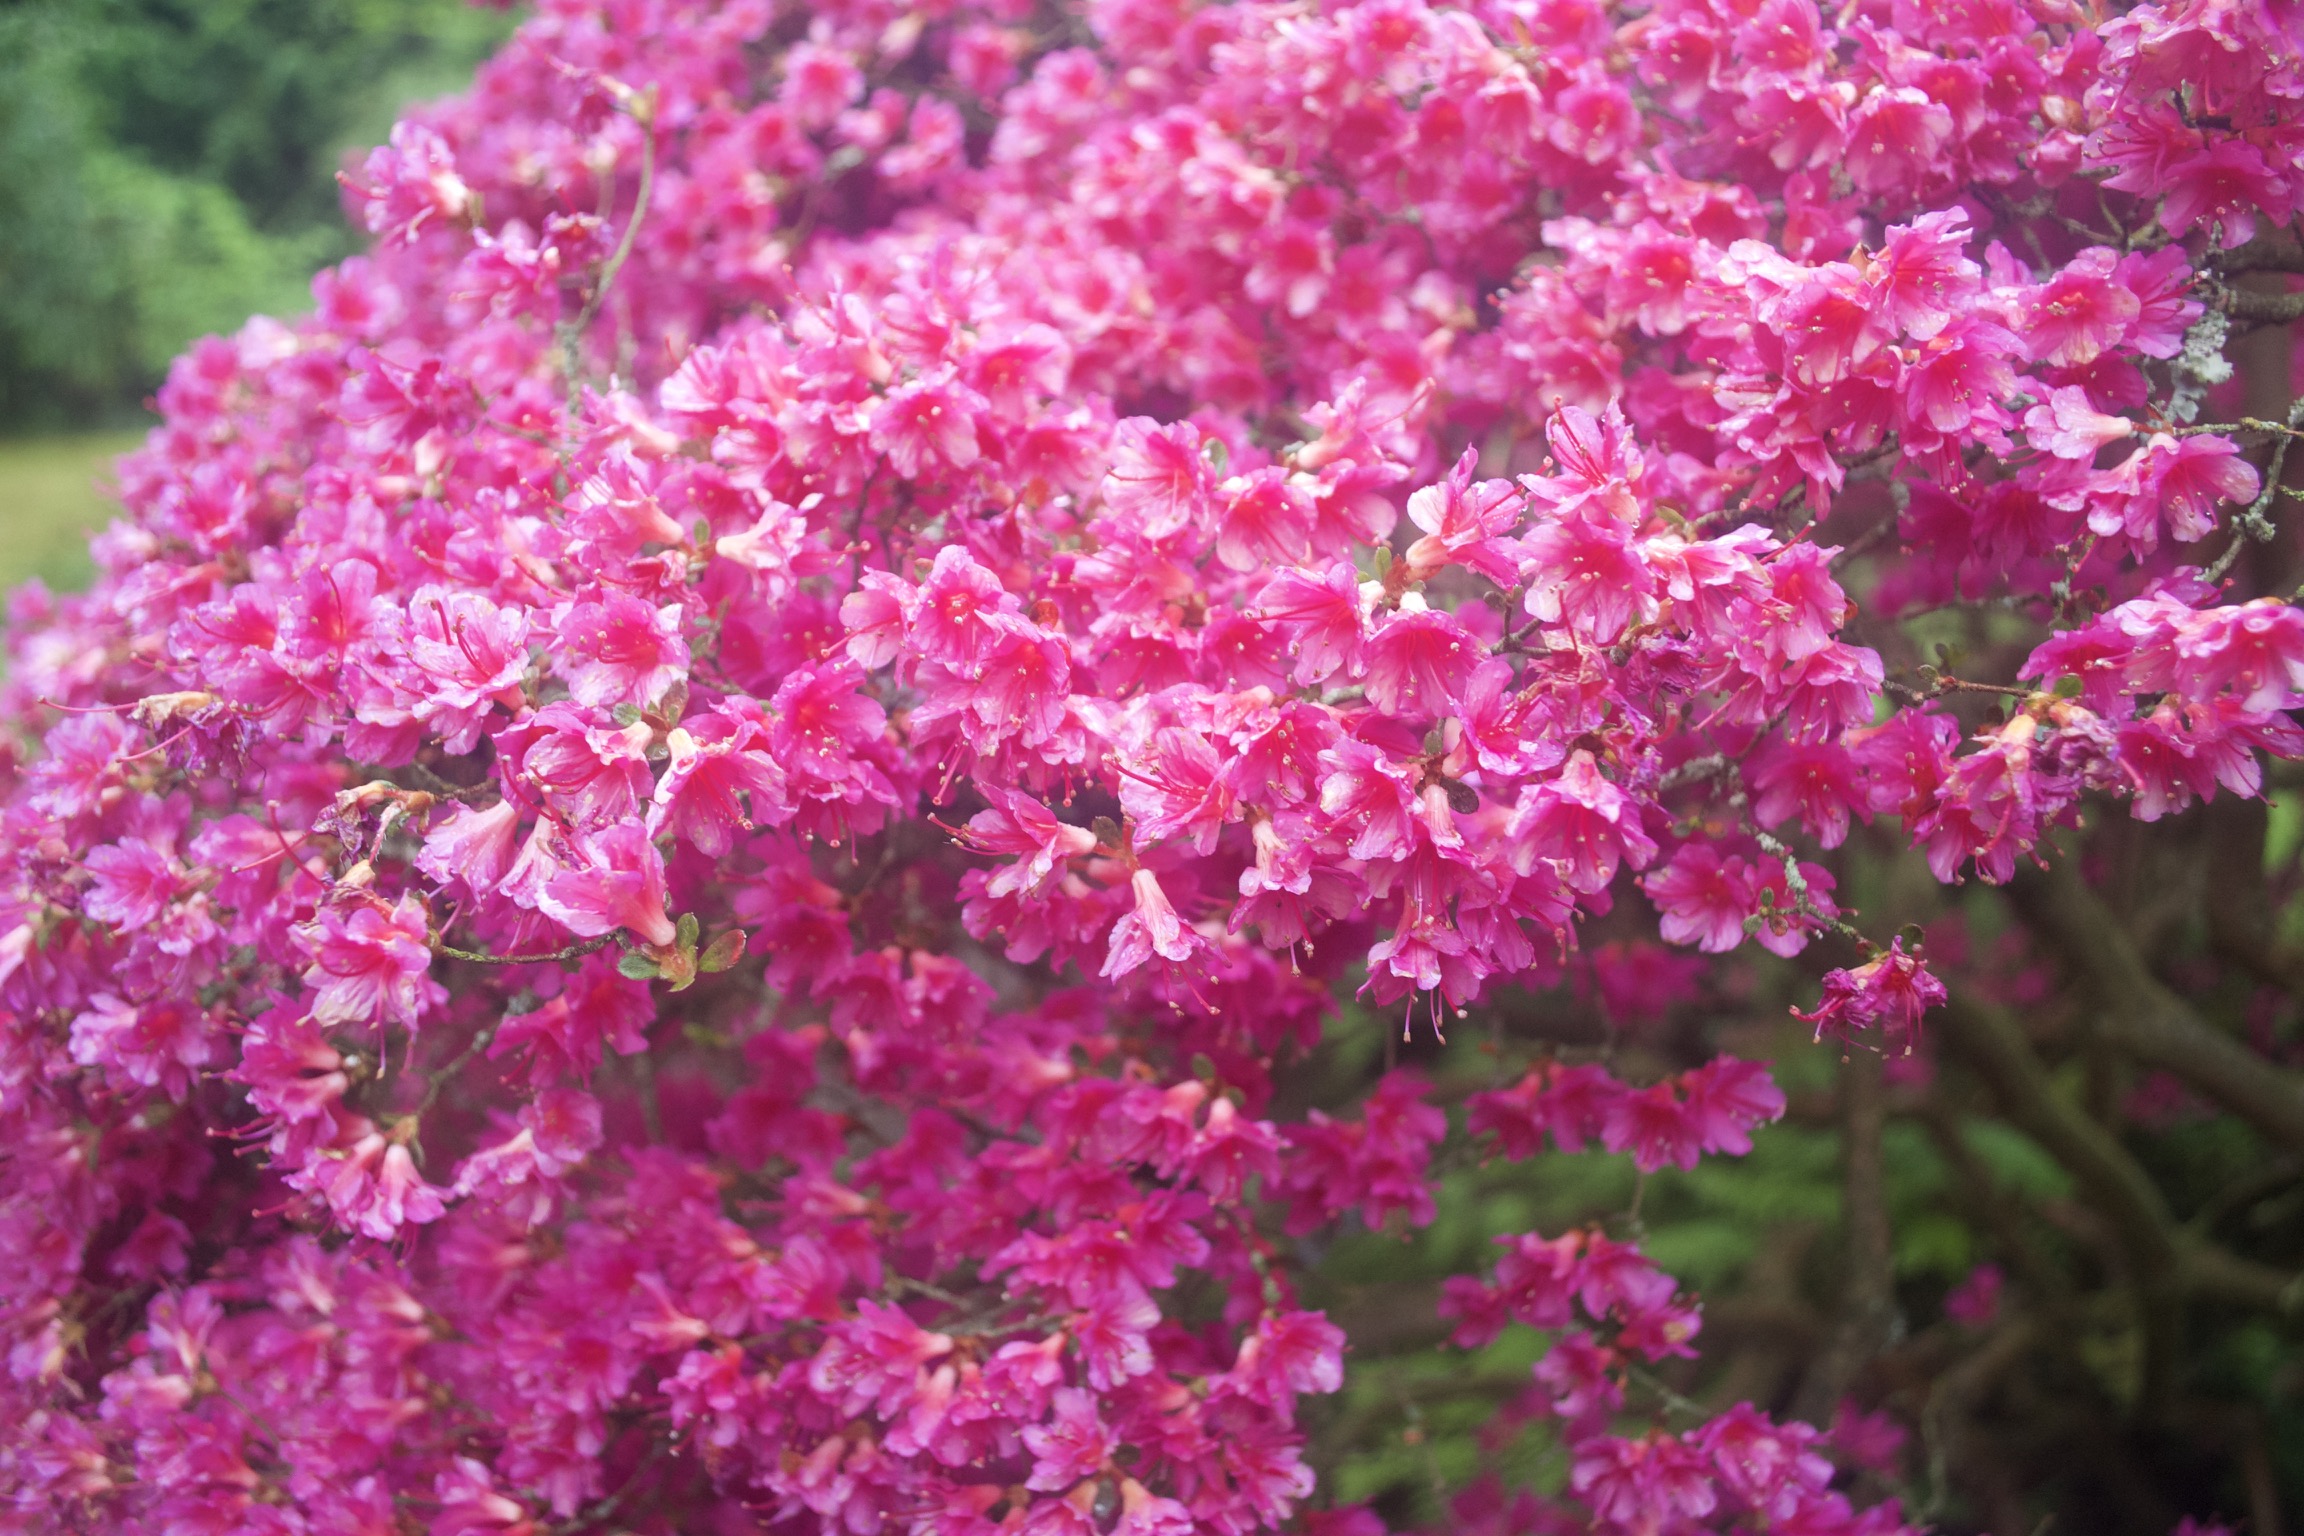 Another pink bush with tamer colors.